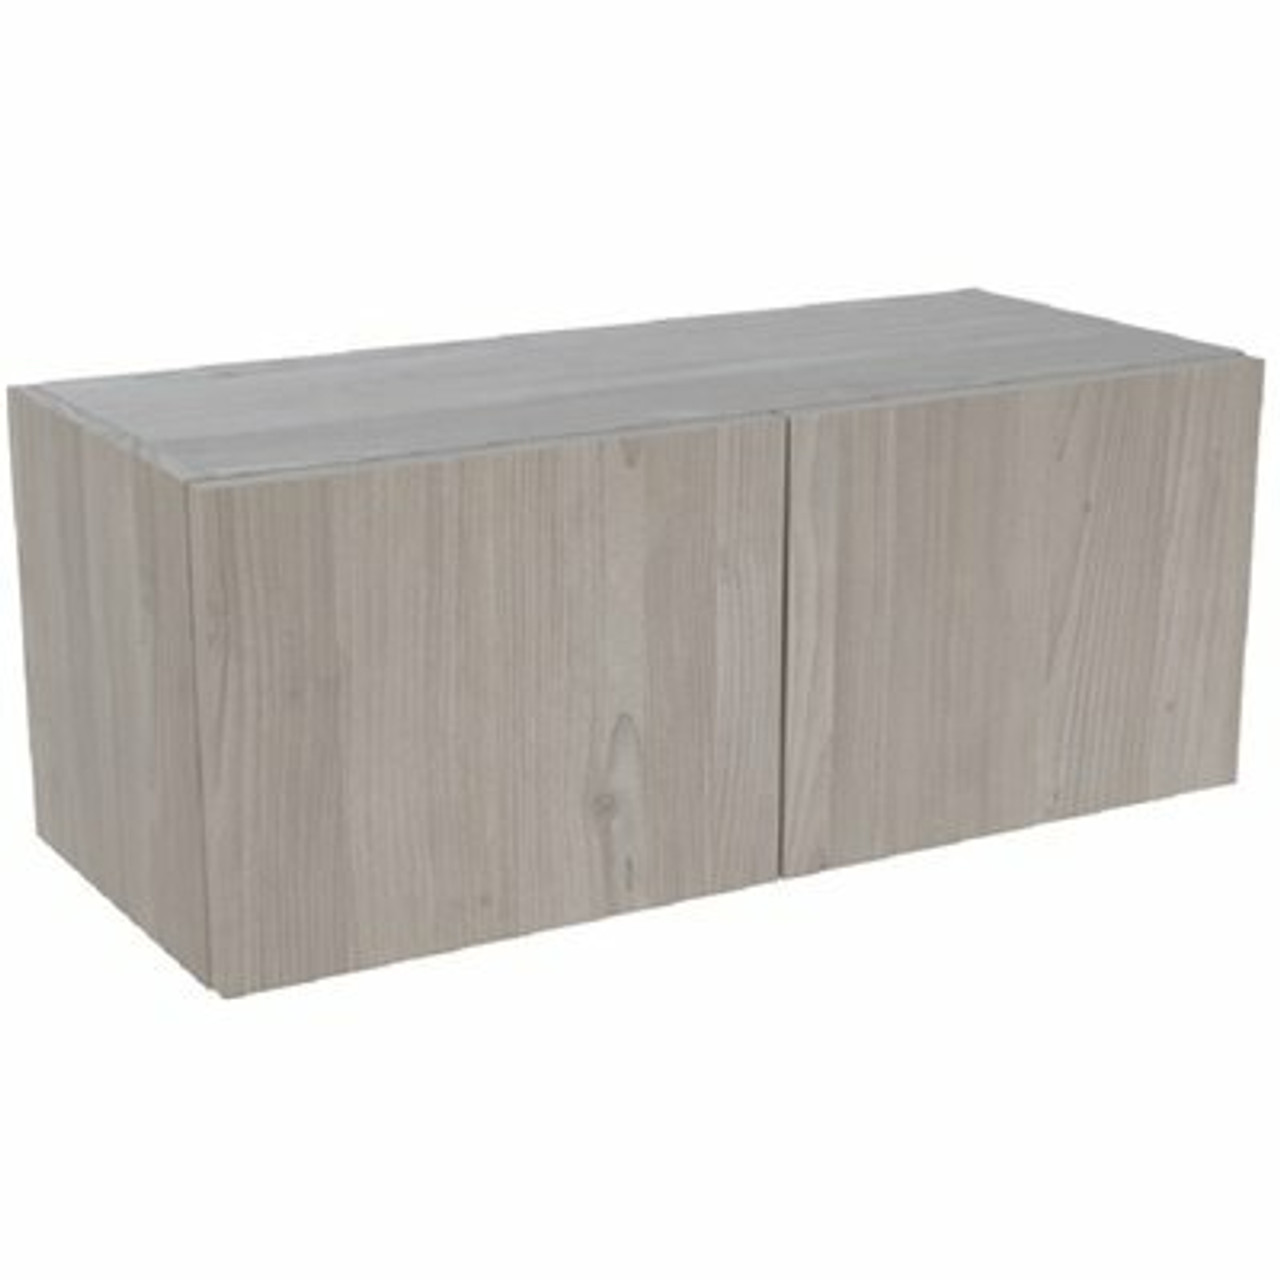 Cambridge Ready To Assemble Threespine 30 In. X 18 In. X 12 In. Stock Bridge Base Cabinet In Grey Nordic